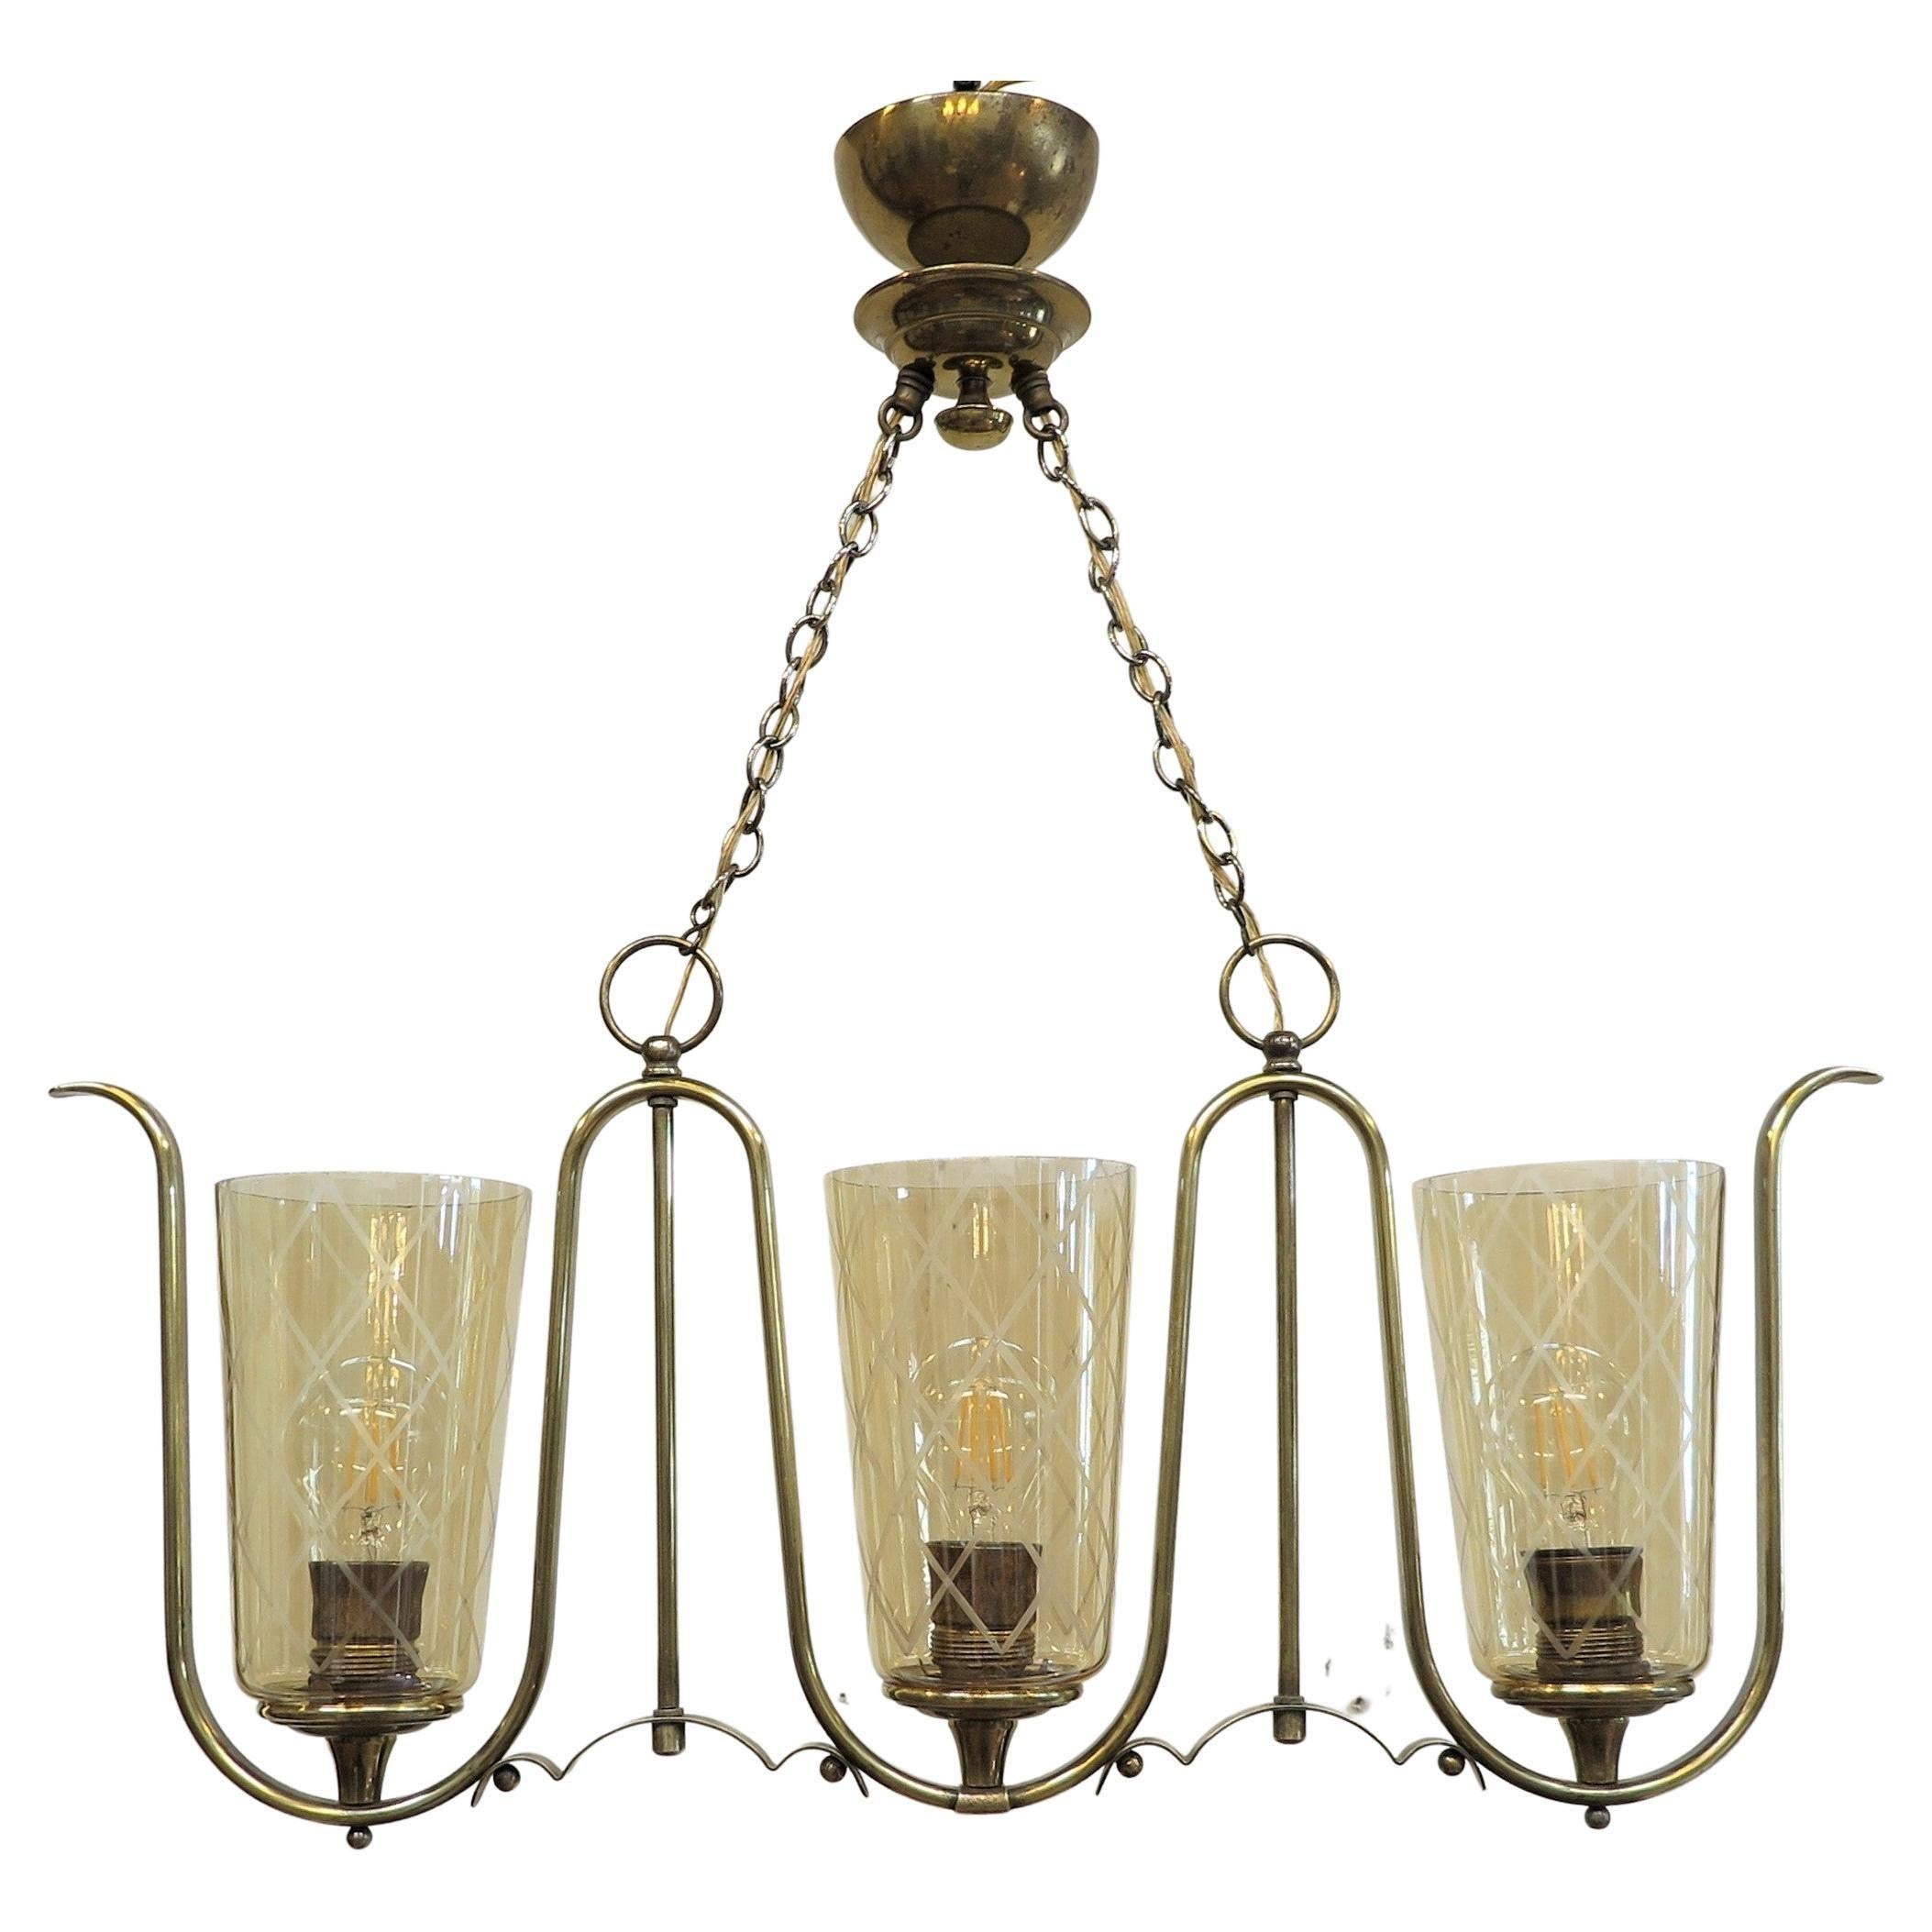 French mid century horizontal chandelier. French Serpentine Horizontal Brass Chandelier in the manner of Jean Royere. A spectacular Serpentine Horizontal Brass Chandelier distinctly in the design style and attributes of French Designer Jean Royere.